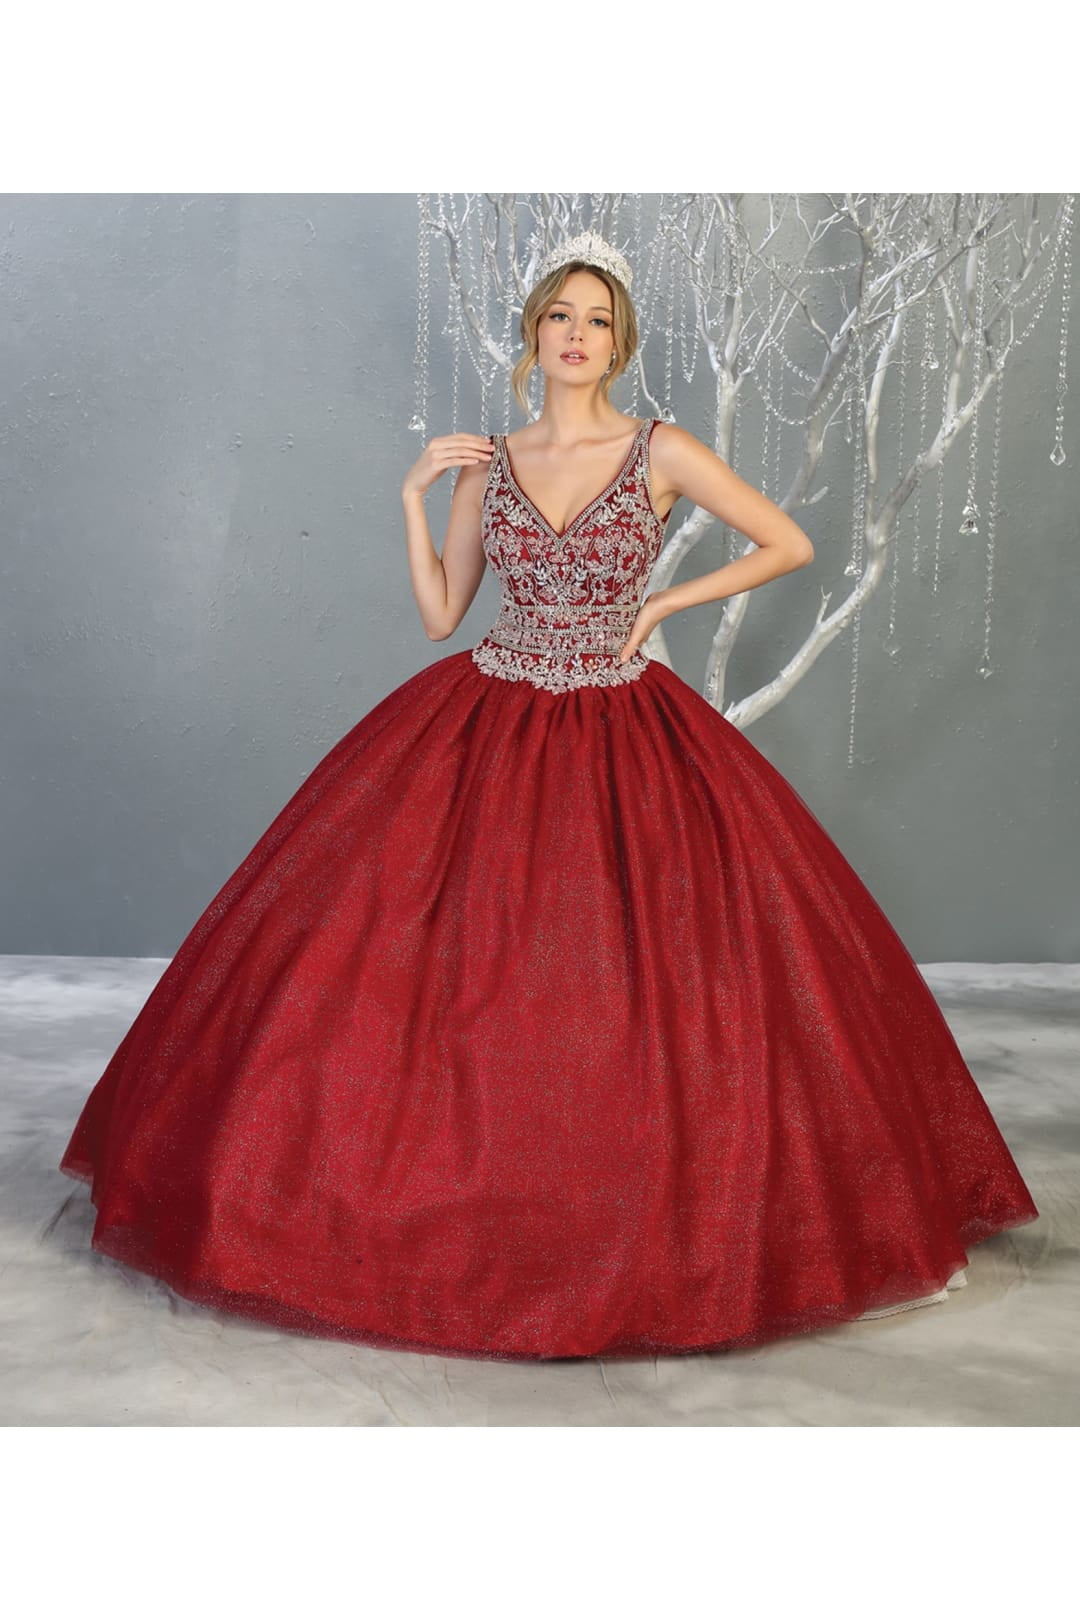 Romantic Red Quinceanera Dress With Handmade Flowers Ball Gown Prom Go –  Siaoryne